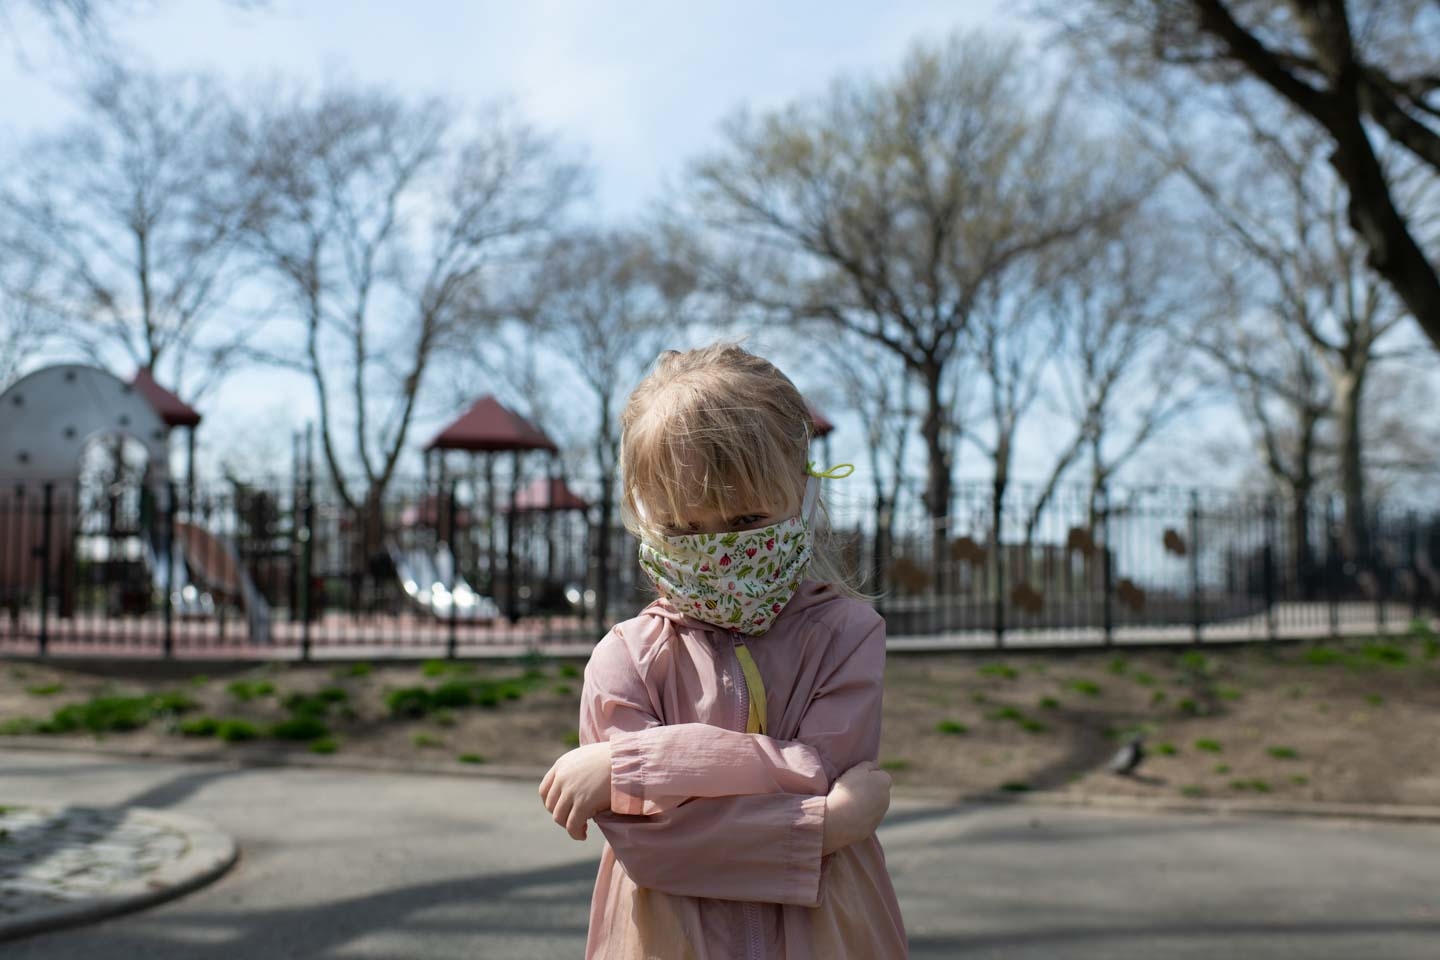 A little girl with a face mask on crosses her arms in front of gated playground